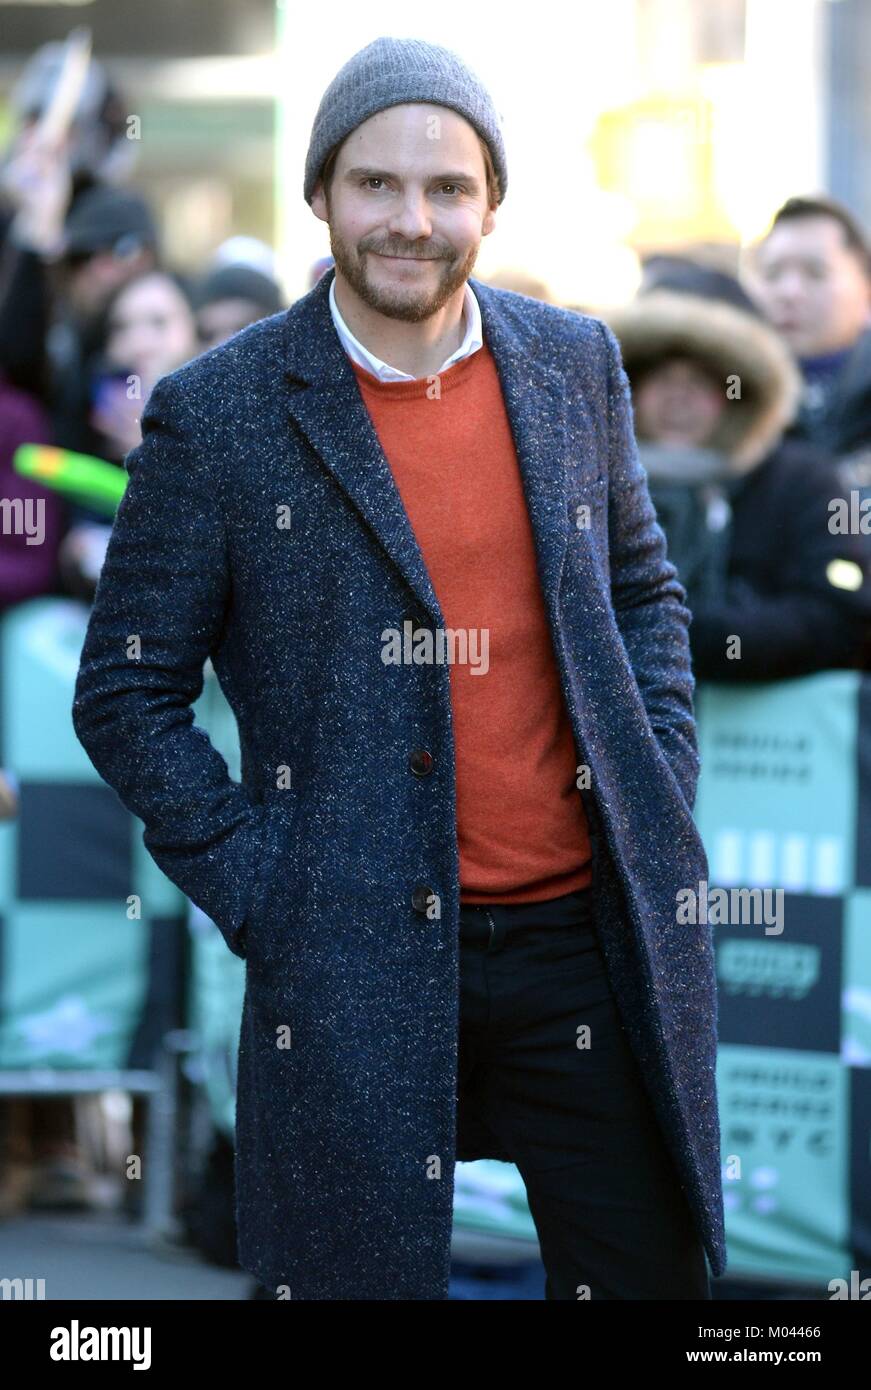 New York, NY, USA. 18th Jan, 2018. Daniel Bruhl out and about for Celebrity Candids - THU, New York, NY January 18, 2018. Credit: Kristin Callahan/Everett Collection/Alamy Live News Stock Photo